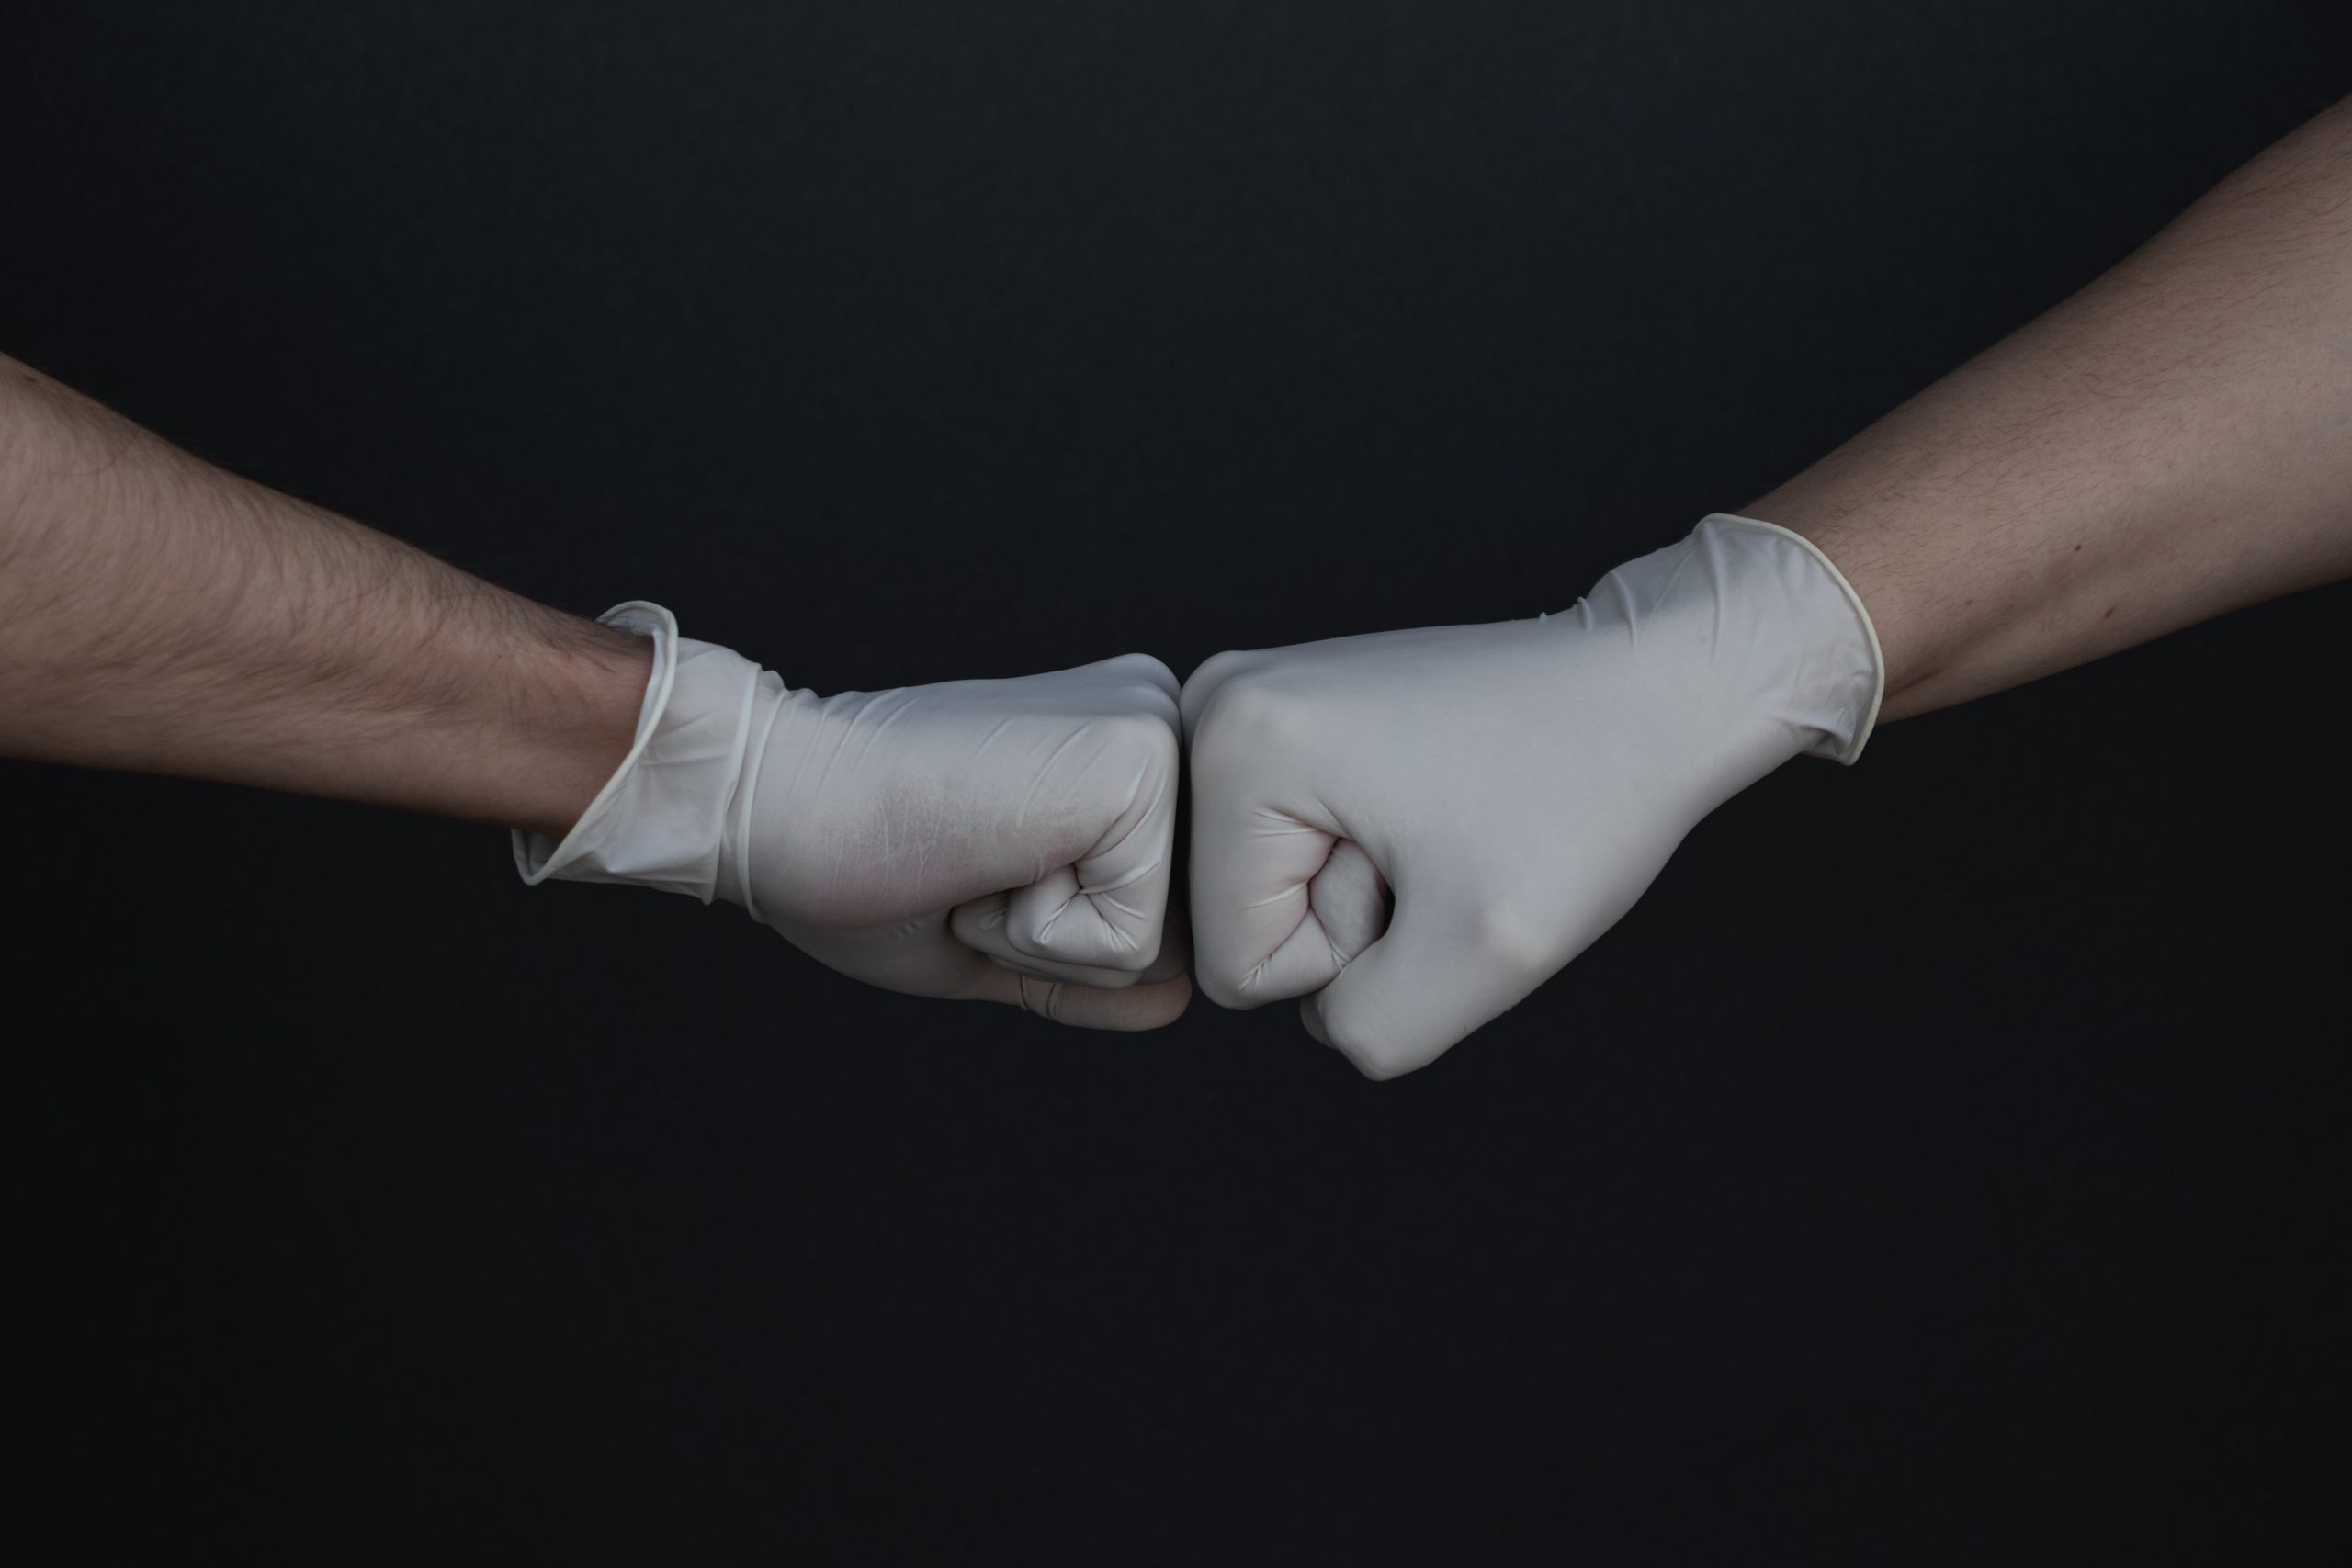 A fist bump between people wearing gloves